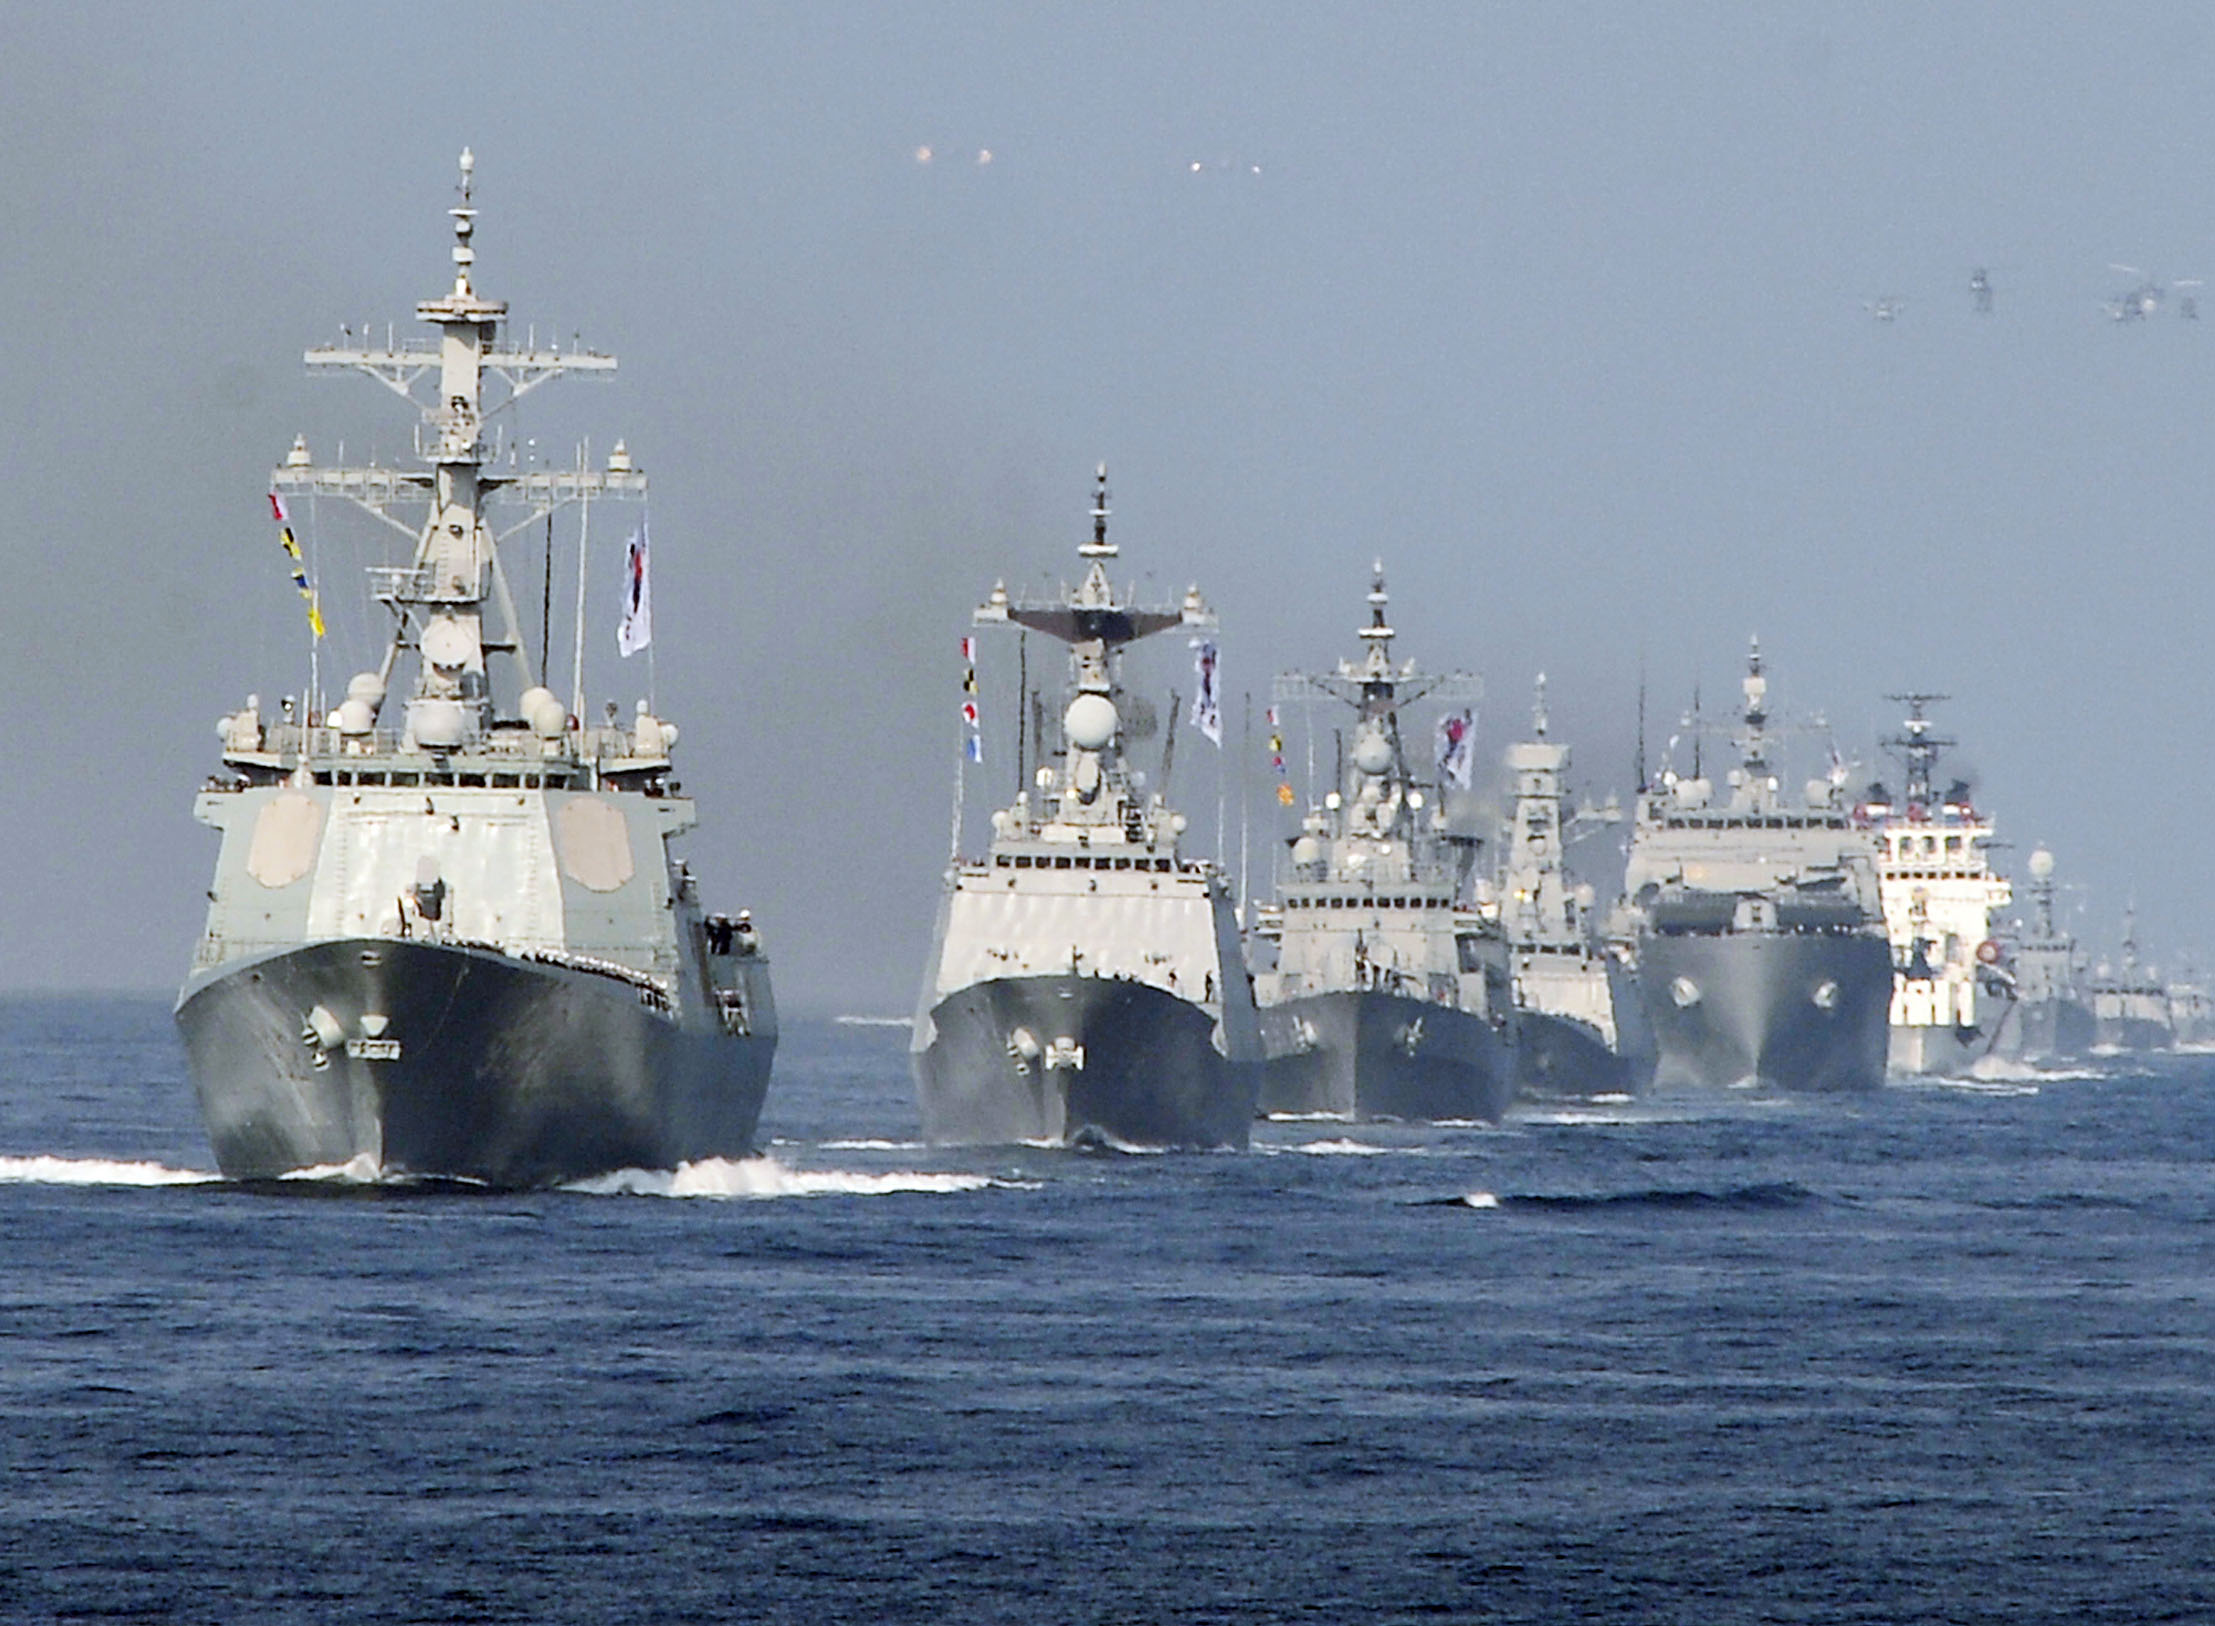 South Korean military vessels navigate on waters off Busan, South Korea, on Oct. 23, 2015, during a fleet review to celebrate the 70th founding anniversary of the country's navy (Kyodo—AP)